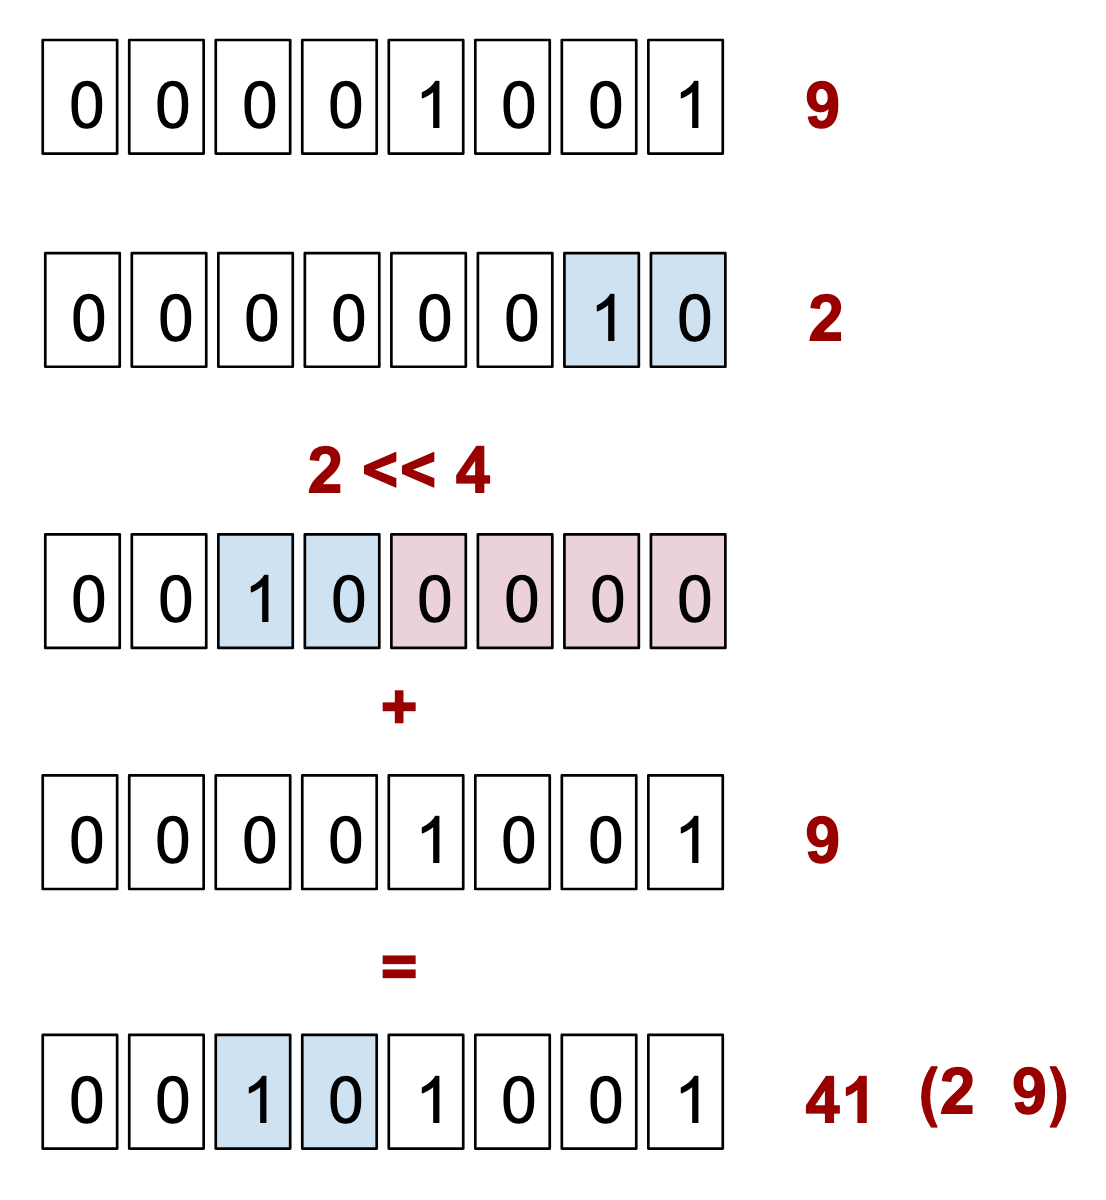 Packing two digits into one byte